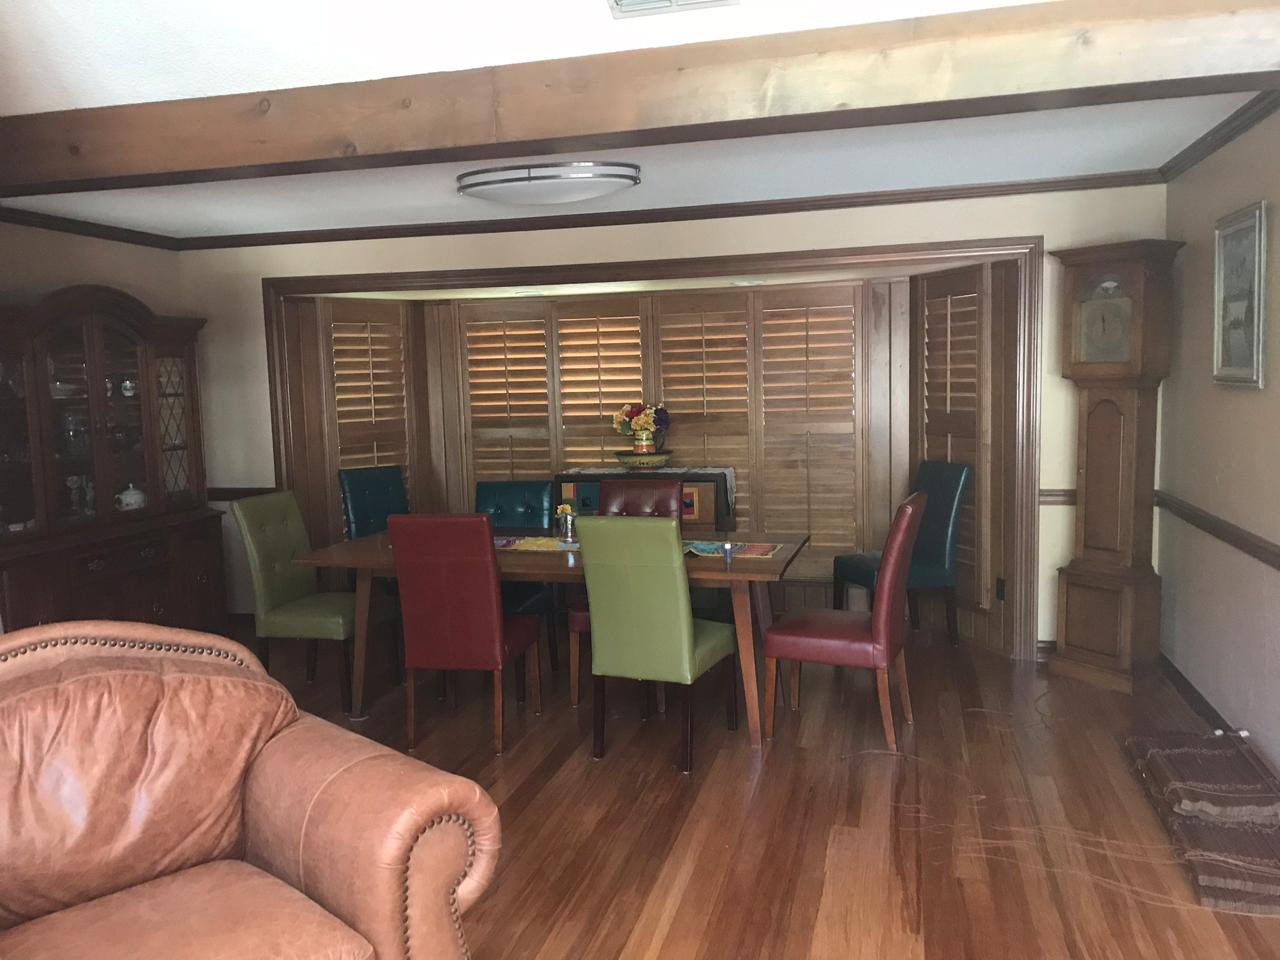 Dining room area with stained shutters